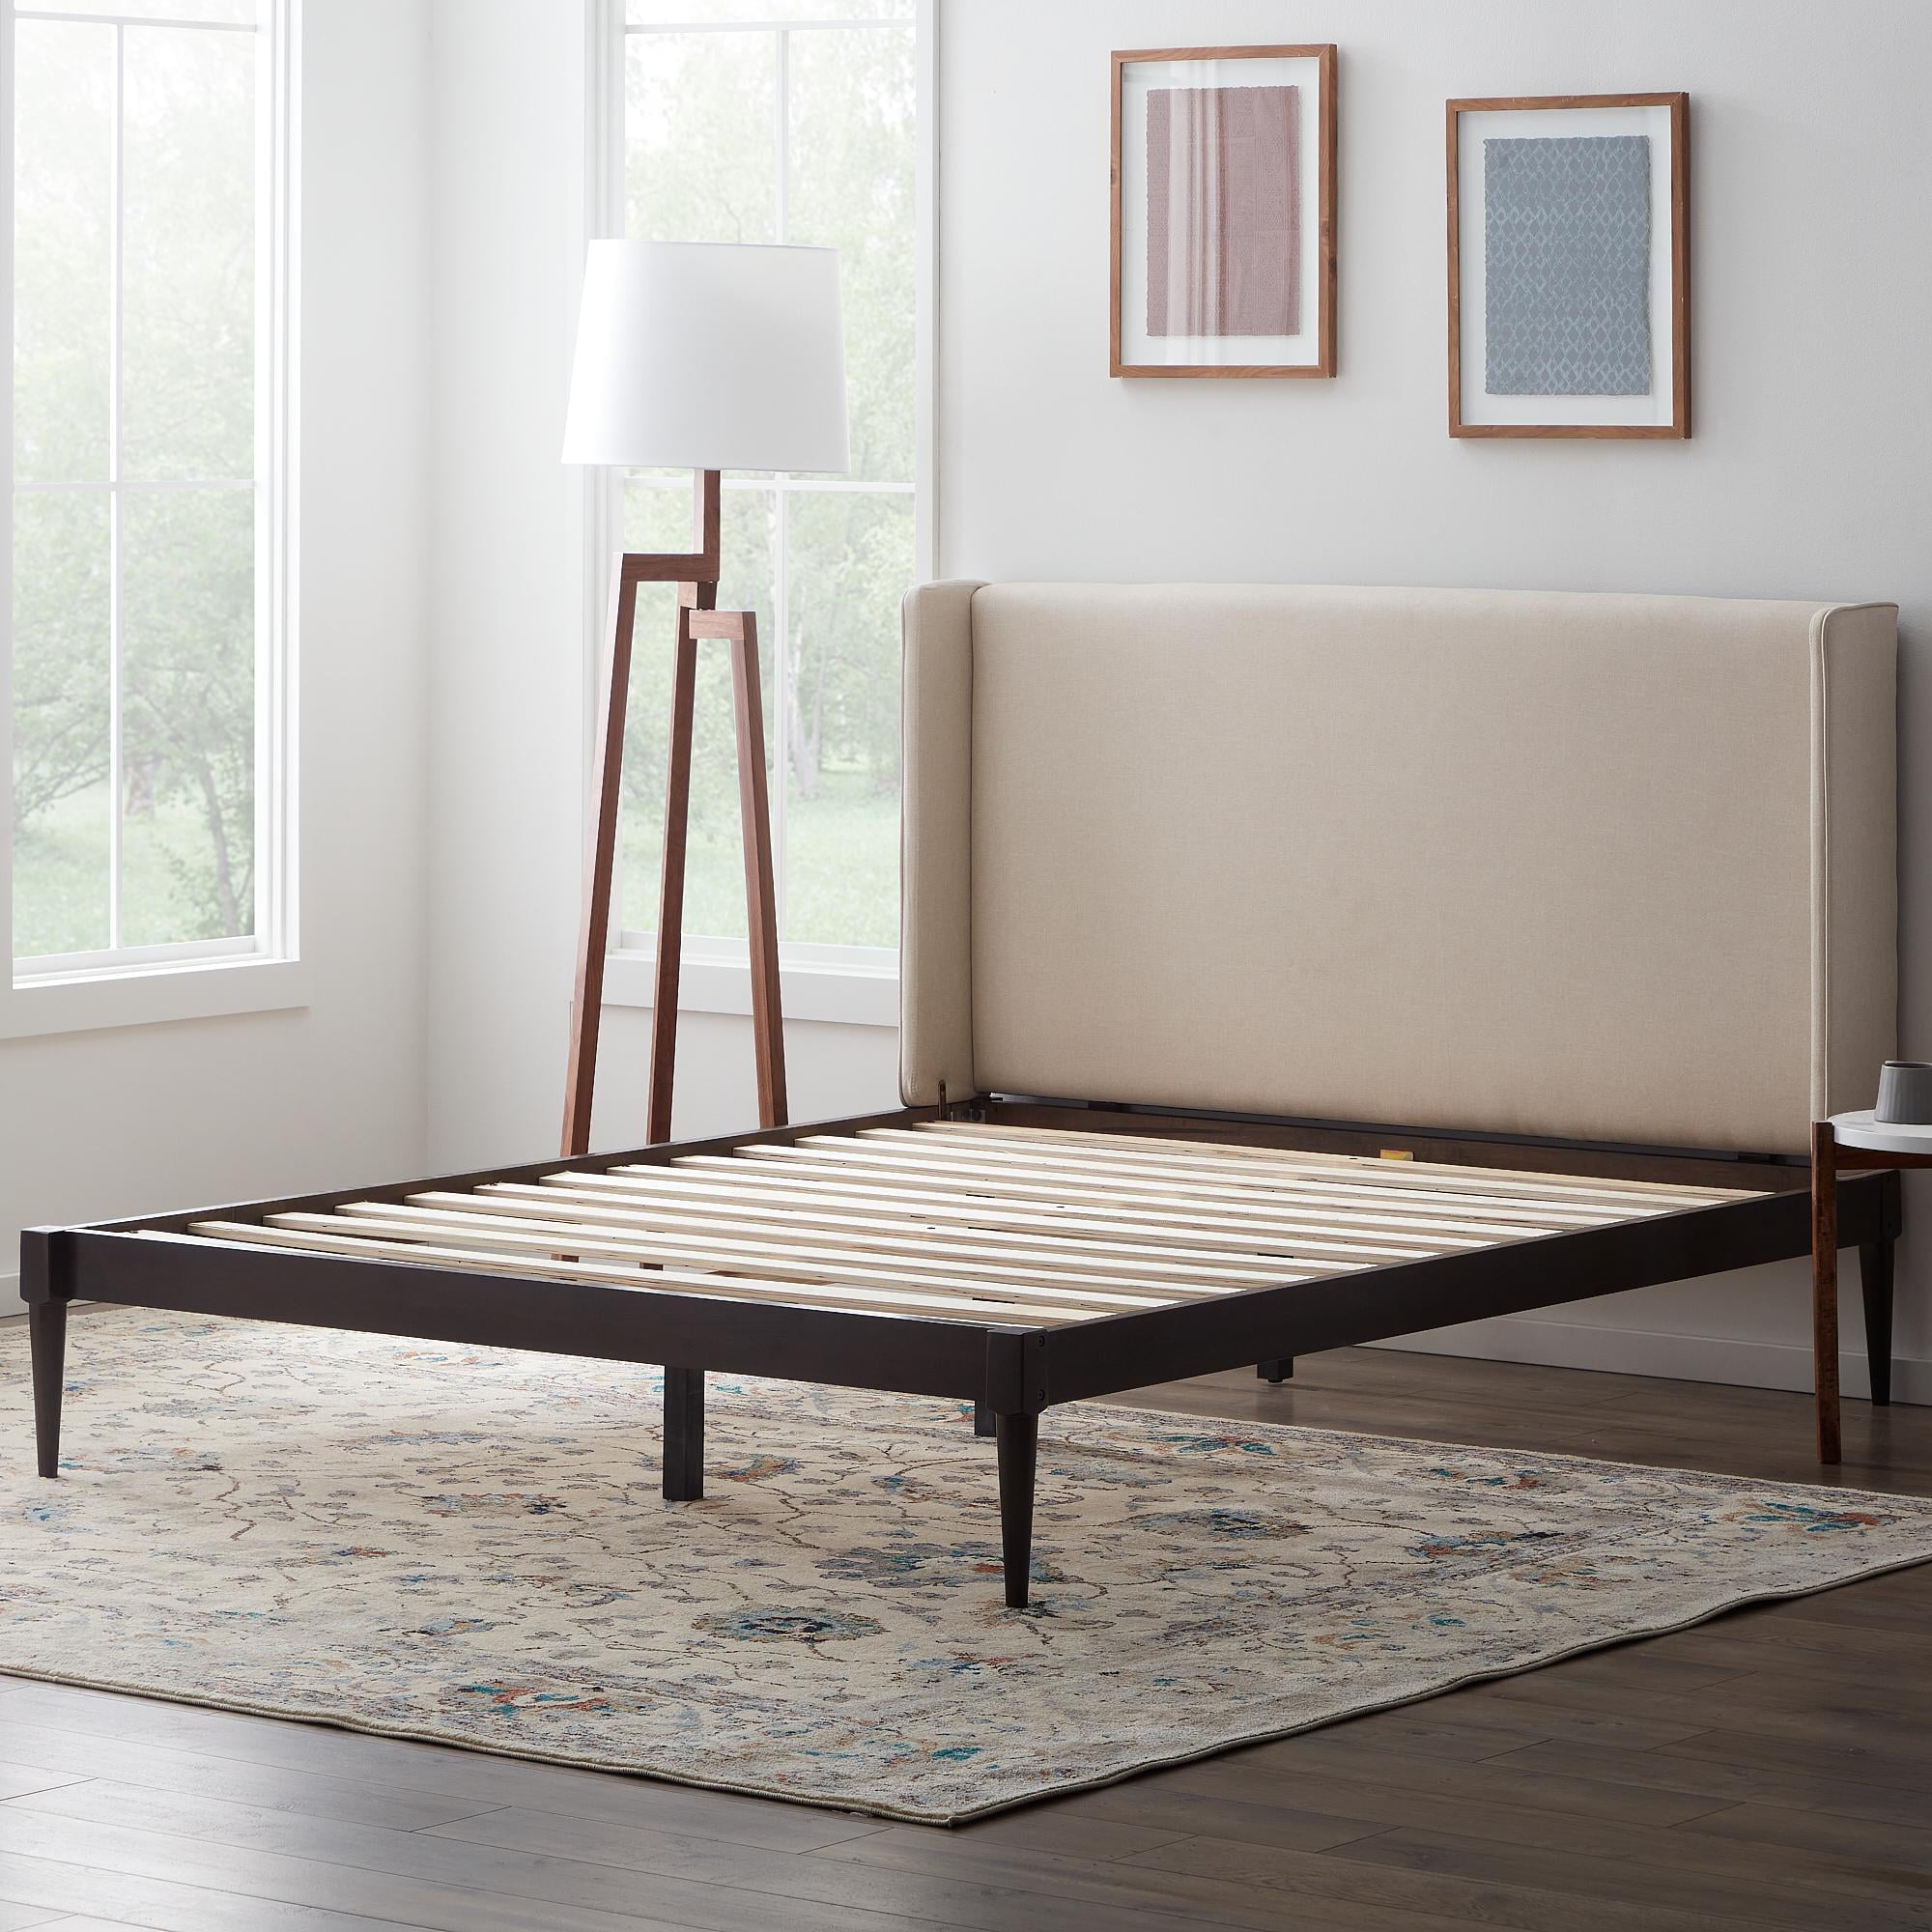 Twin Metal Frame, no boxspring needed